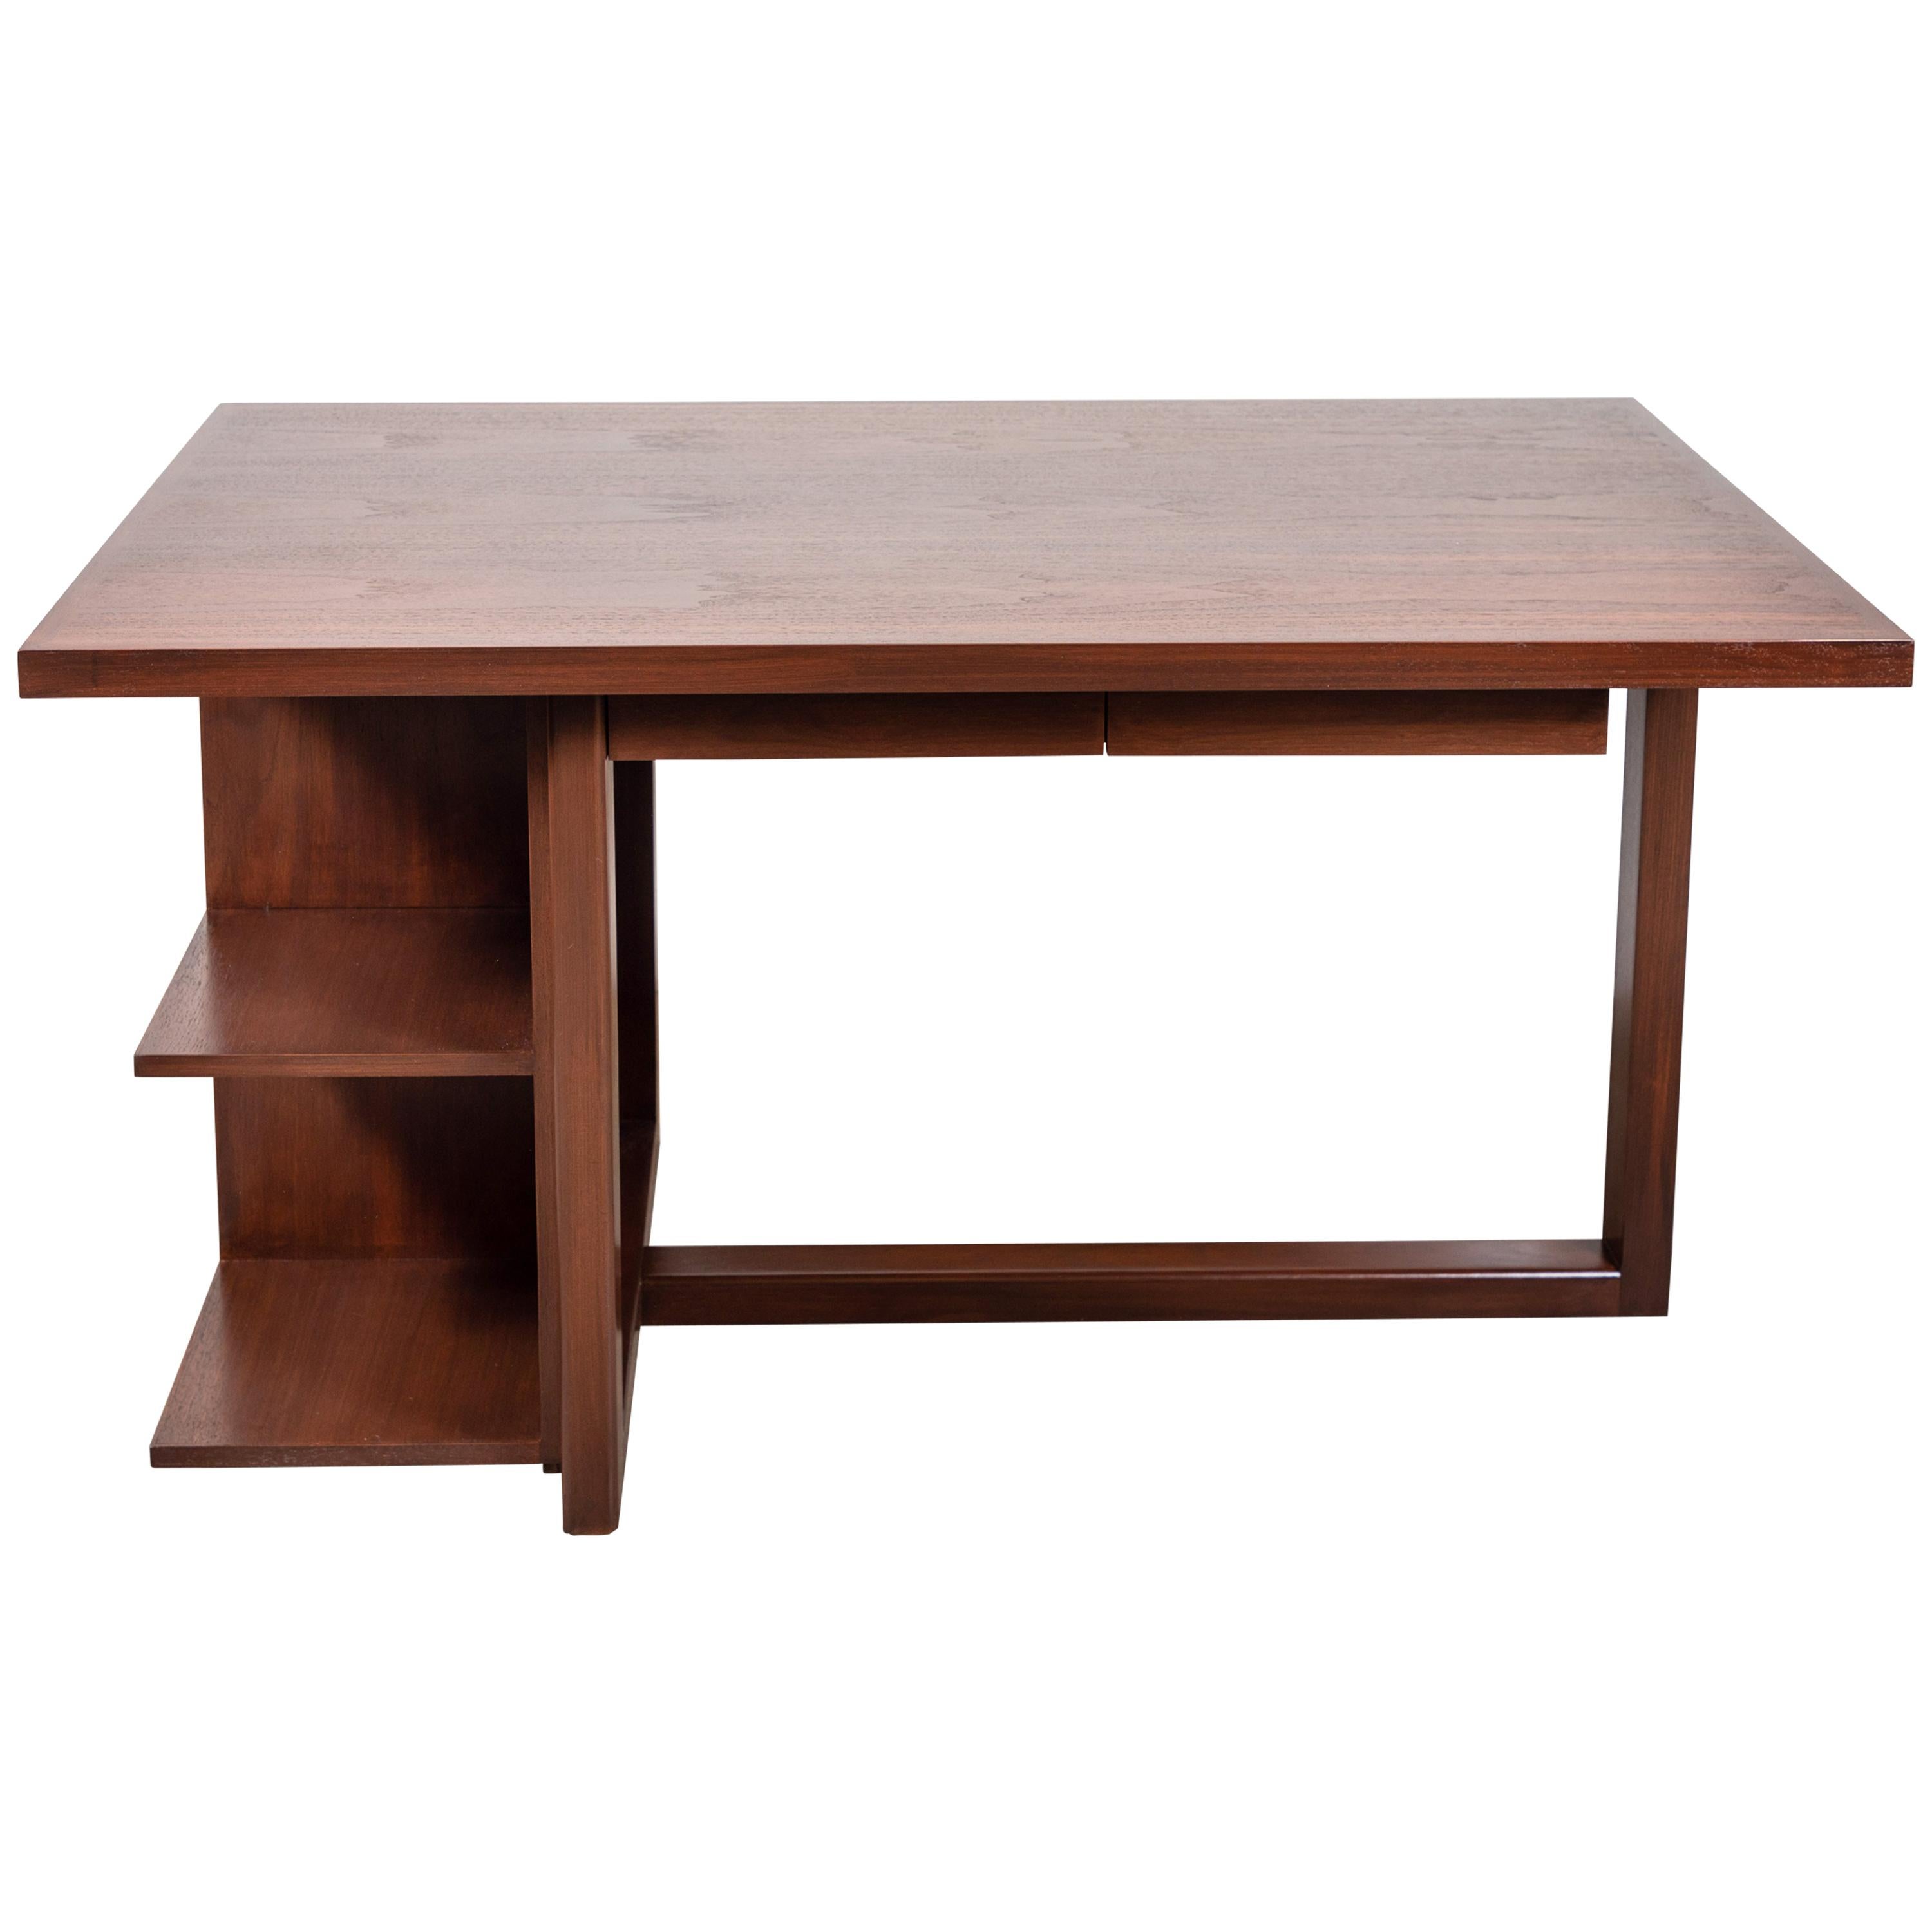 The Ivanhoe Desk features a cantilevered base with open display shelves. Available in American walnut or white oak and drawers are available upon request. Shown here in light walnut. 

The Lawson-Fenning Collection is designed and handmade in Los